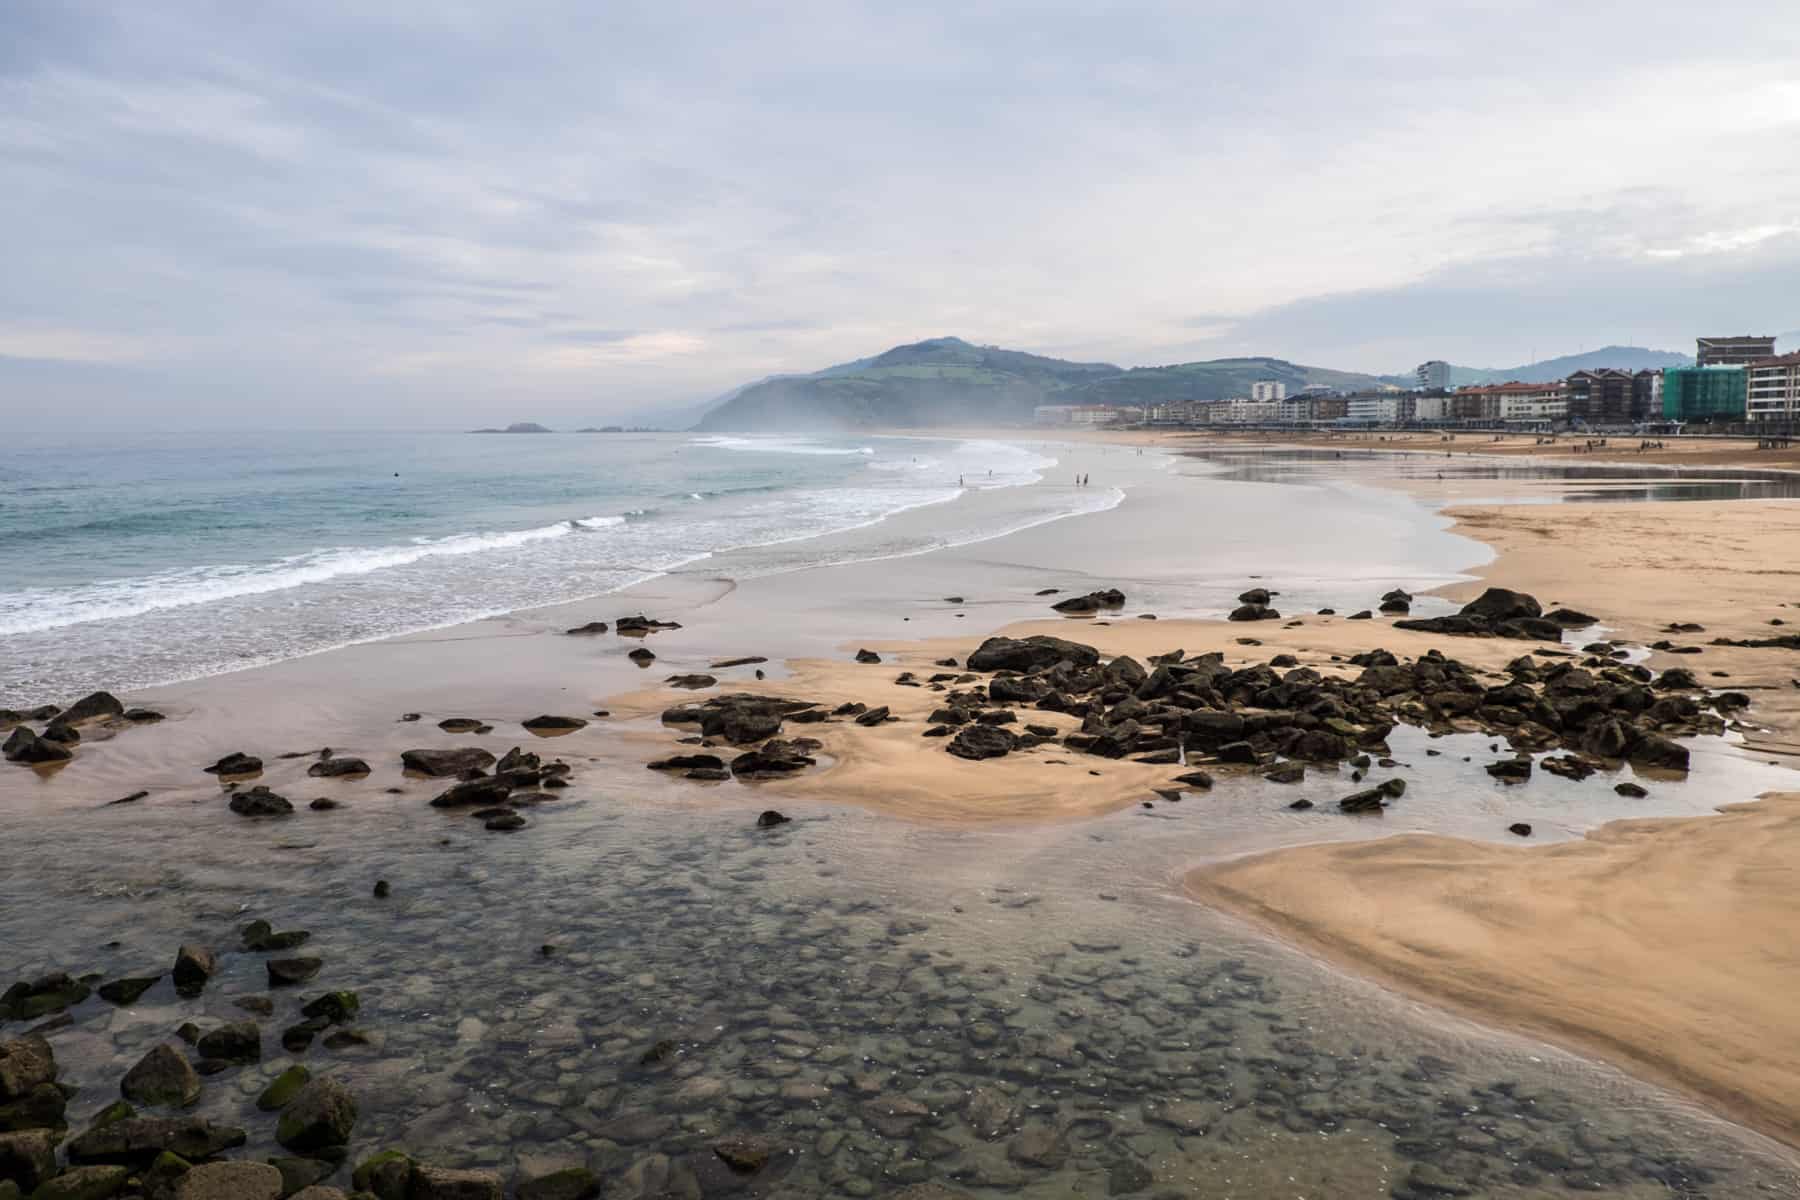 Large rocks strewn on a yellow sand beach of La Concha in San Sebastian. Modern city buildings and rolling hills can be seen in the background. 